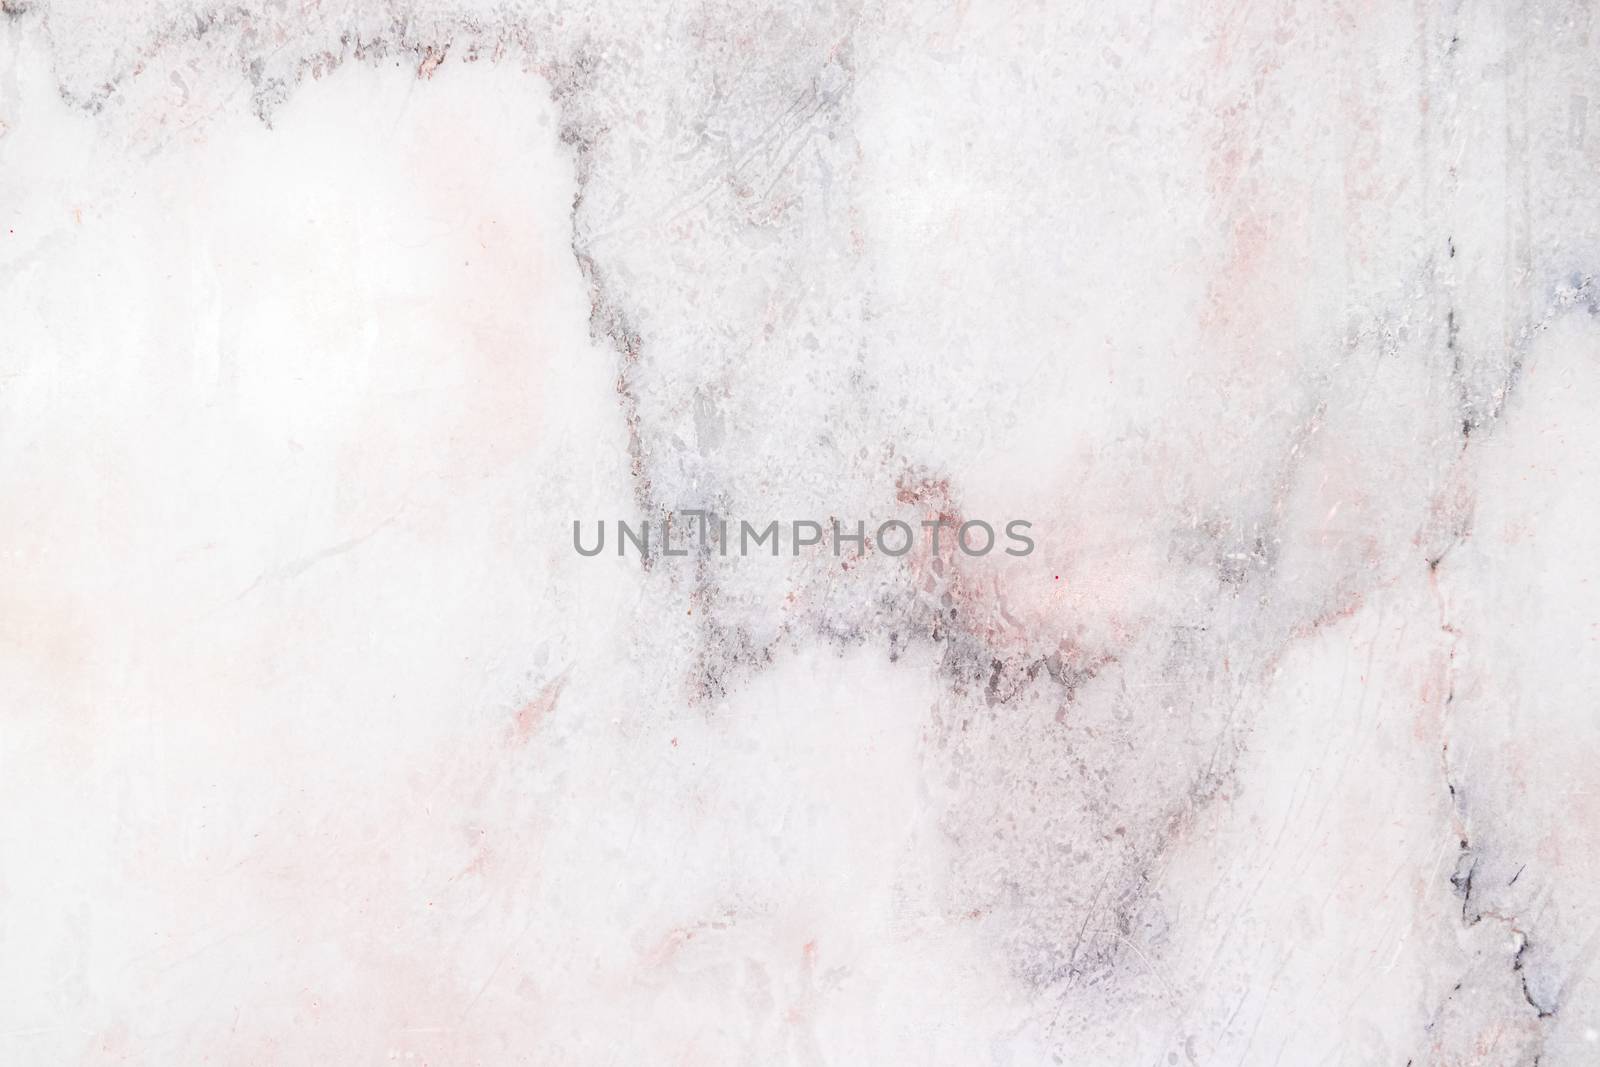 The surface of the marble, white, pink, with black patterns, ins by panyajampatong